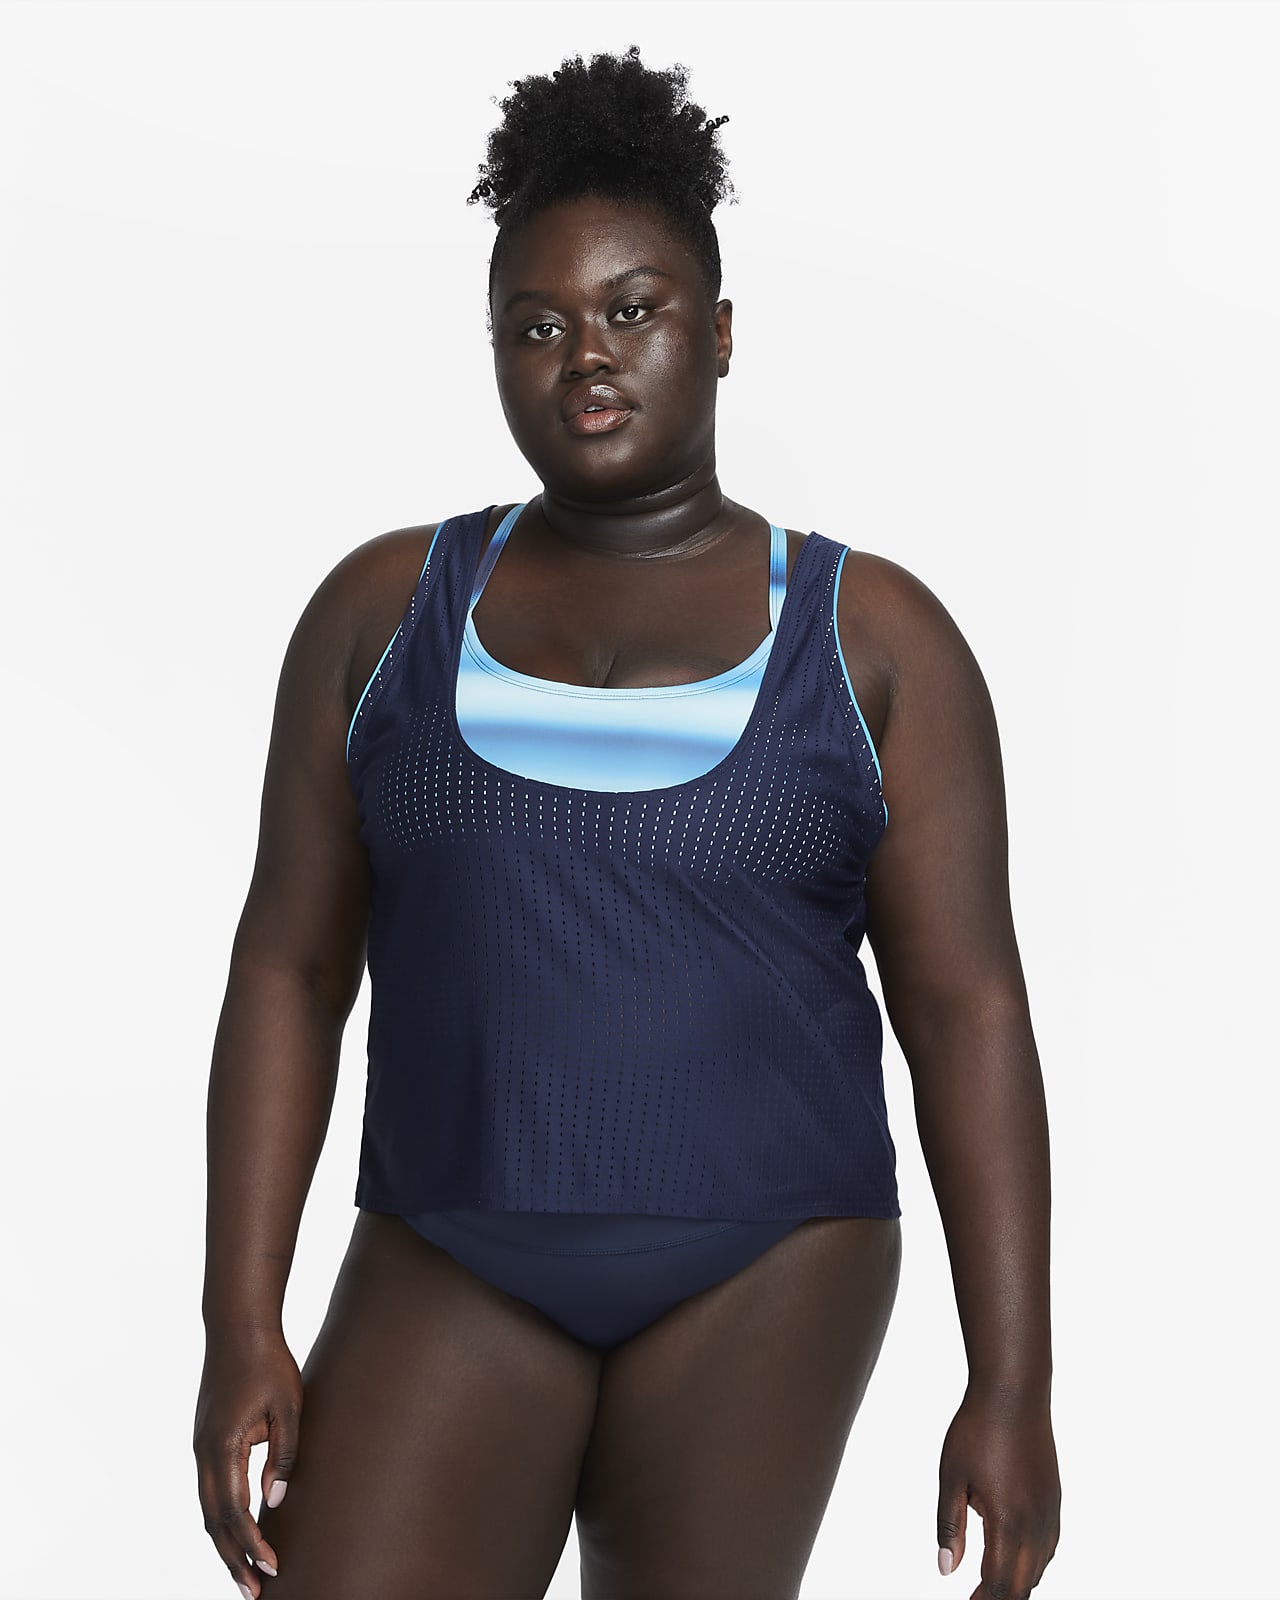 Best Deals for Nike Tankini Swimsuits